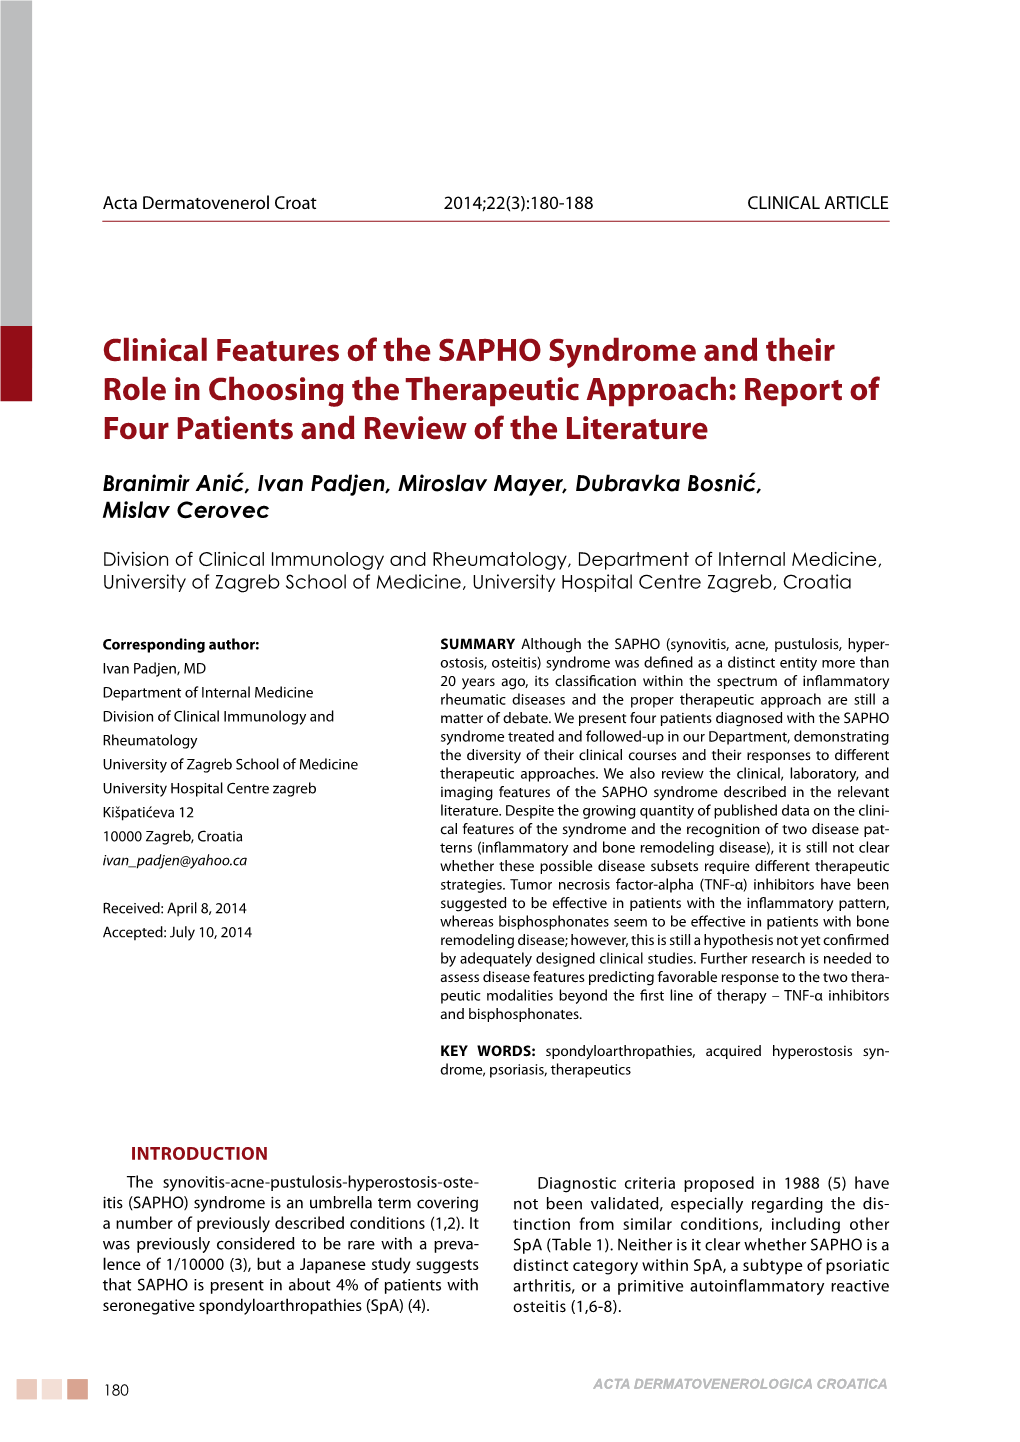 Clinical Features of the SAPHO Syndrome and Their Role in Choosing the Therapeutic Approach: Report of Four Patients and Review of the Literature